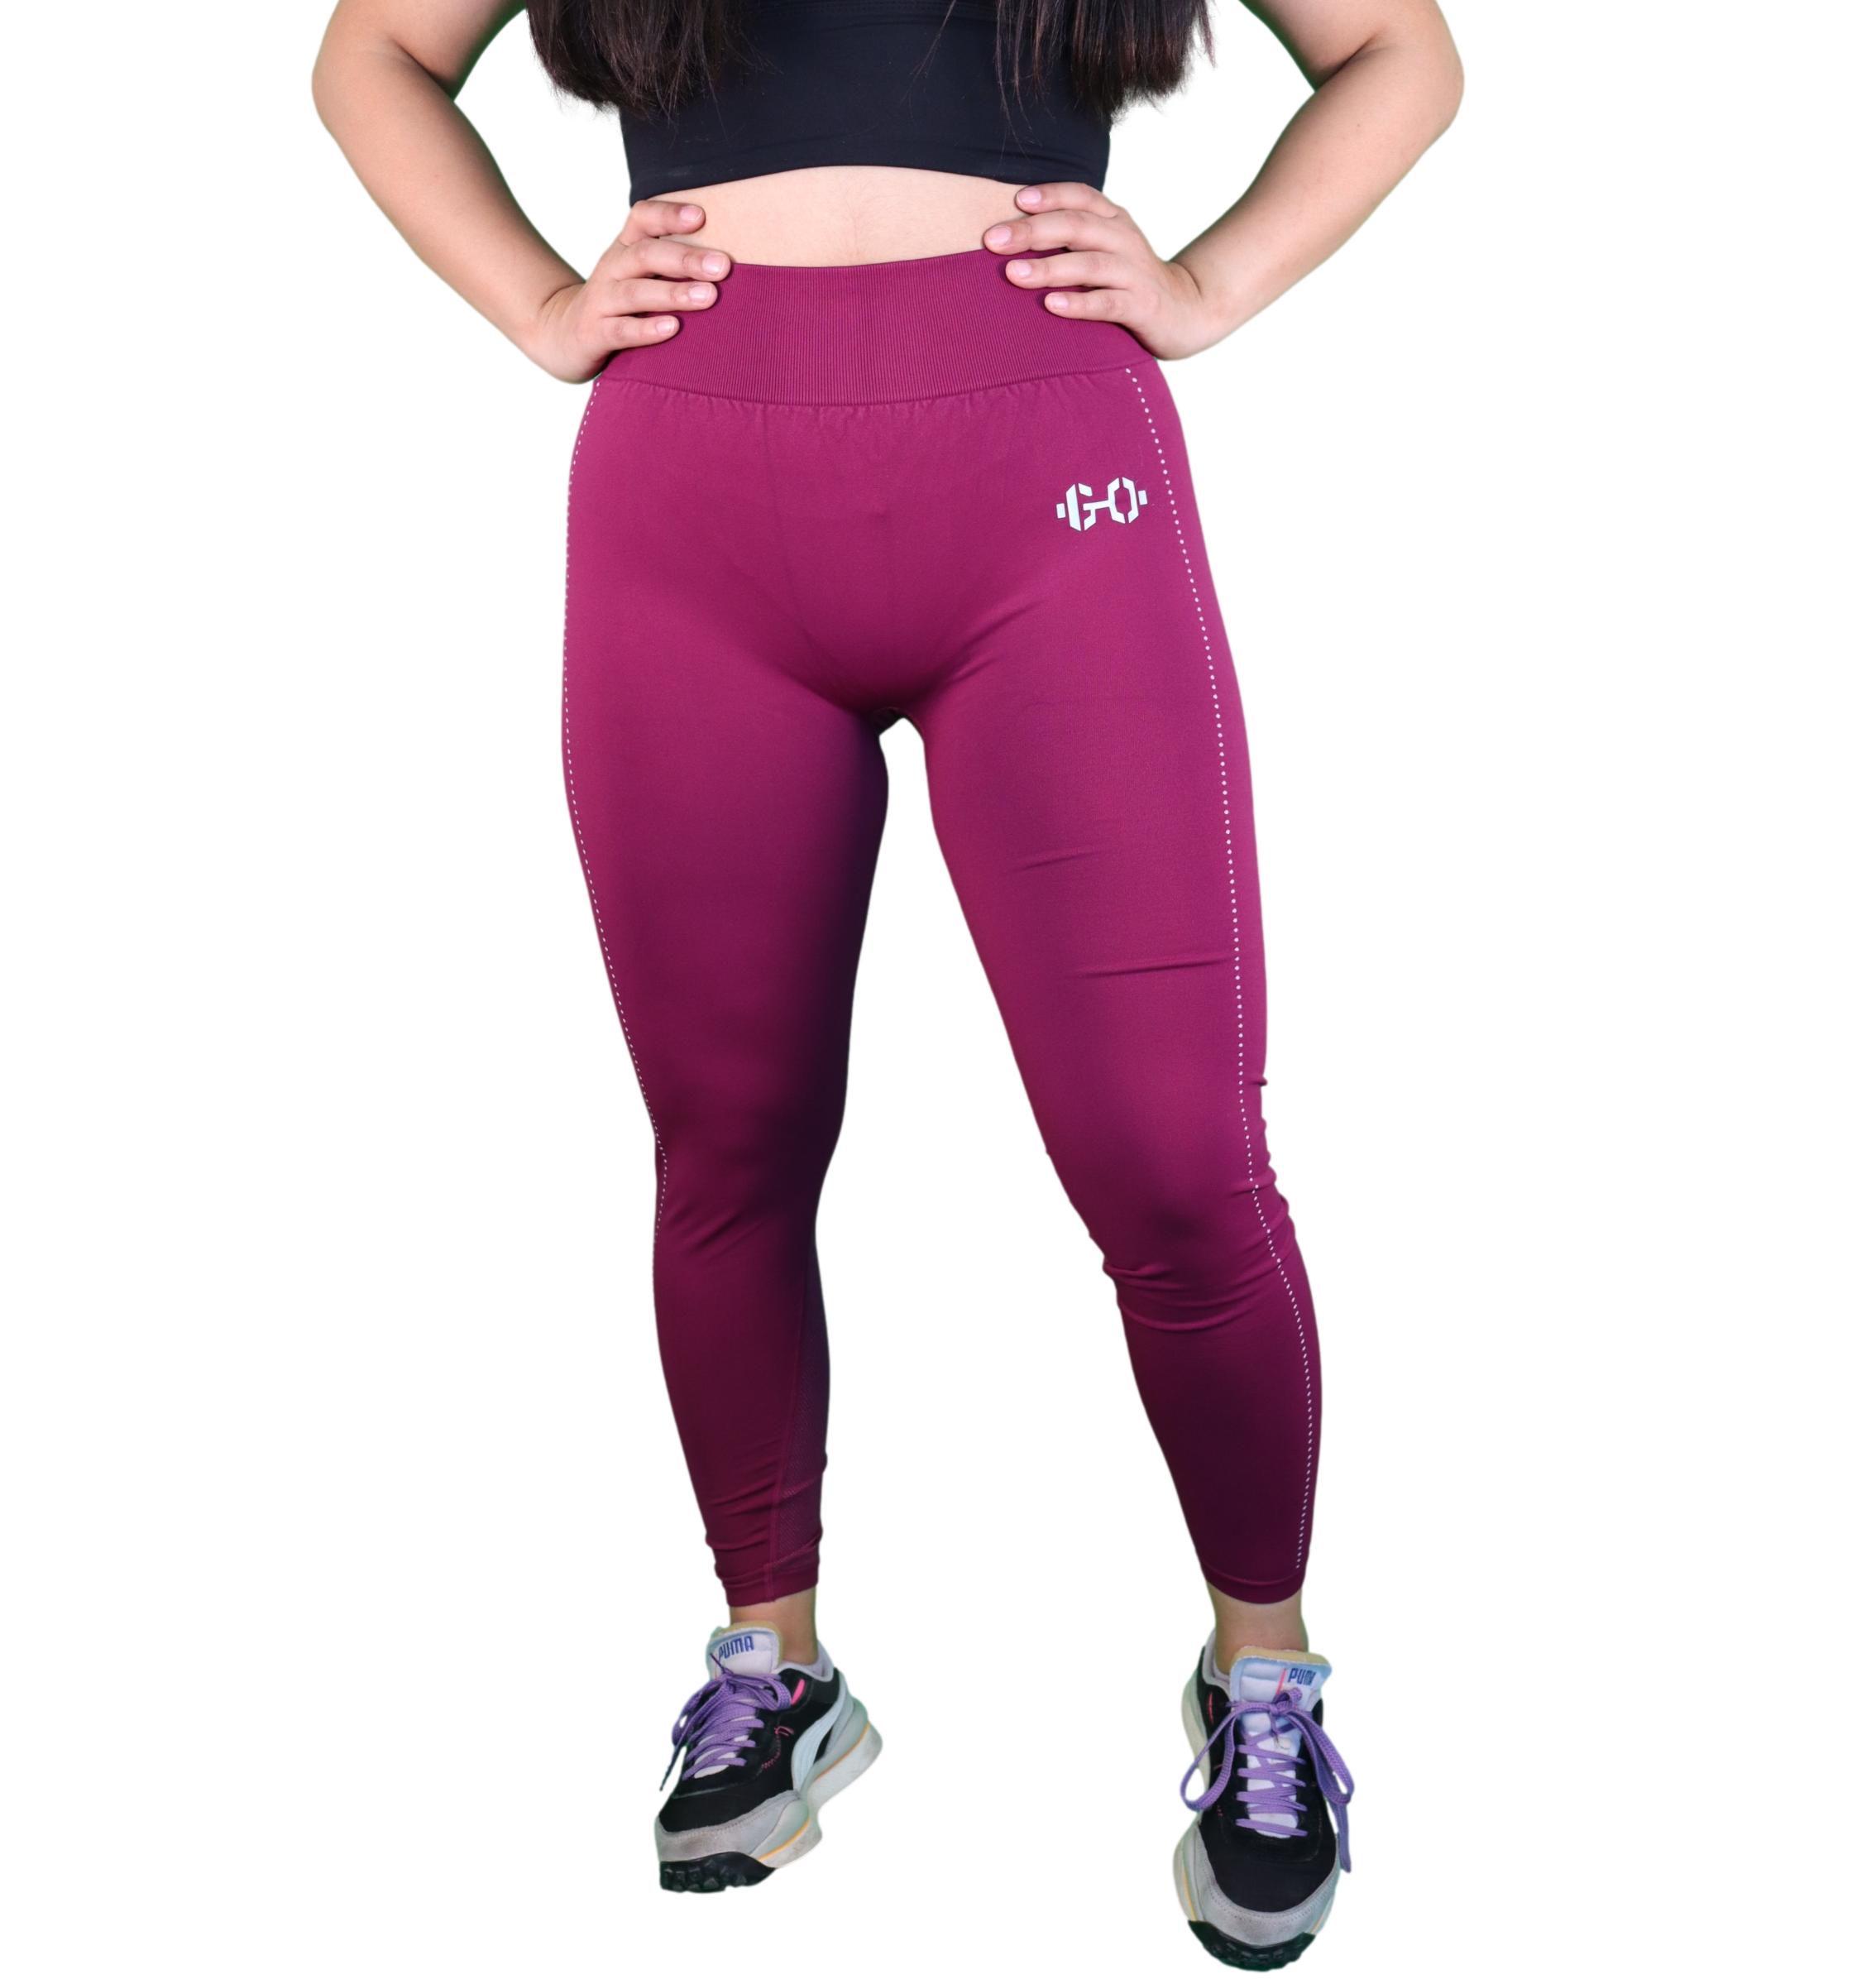 Calzas Largas – GYM OUTFIT